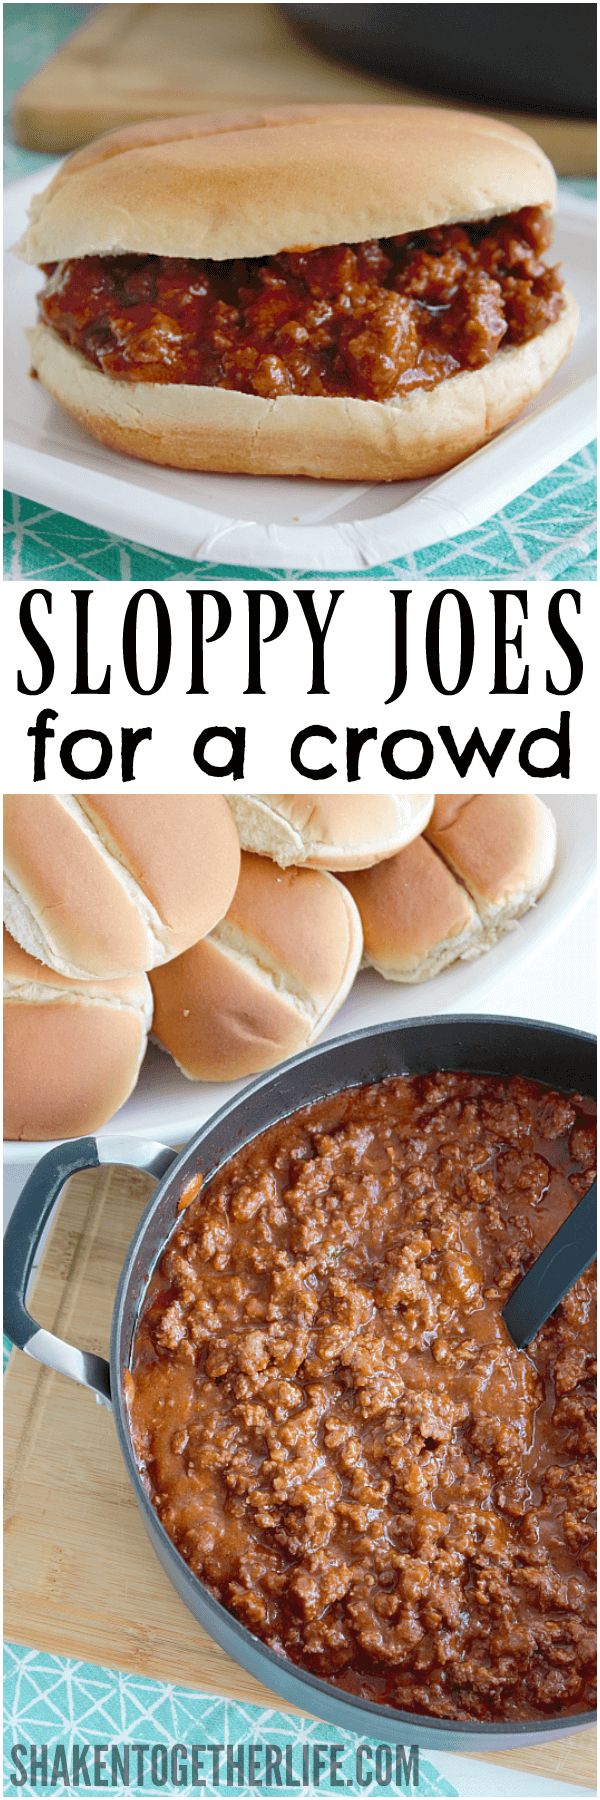 With just 5 ingredients, these Sloppy Joes for a Crowd are easy to make and a big hit with our large extended family!